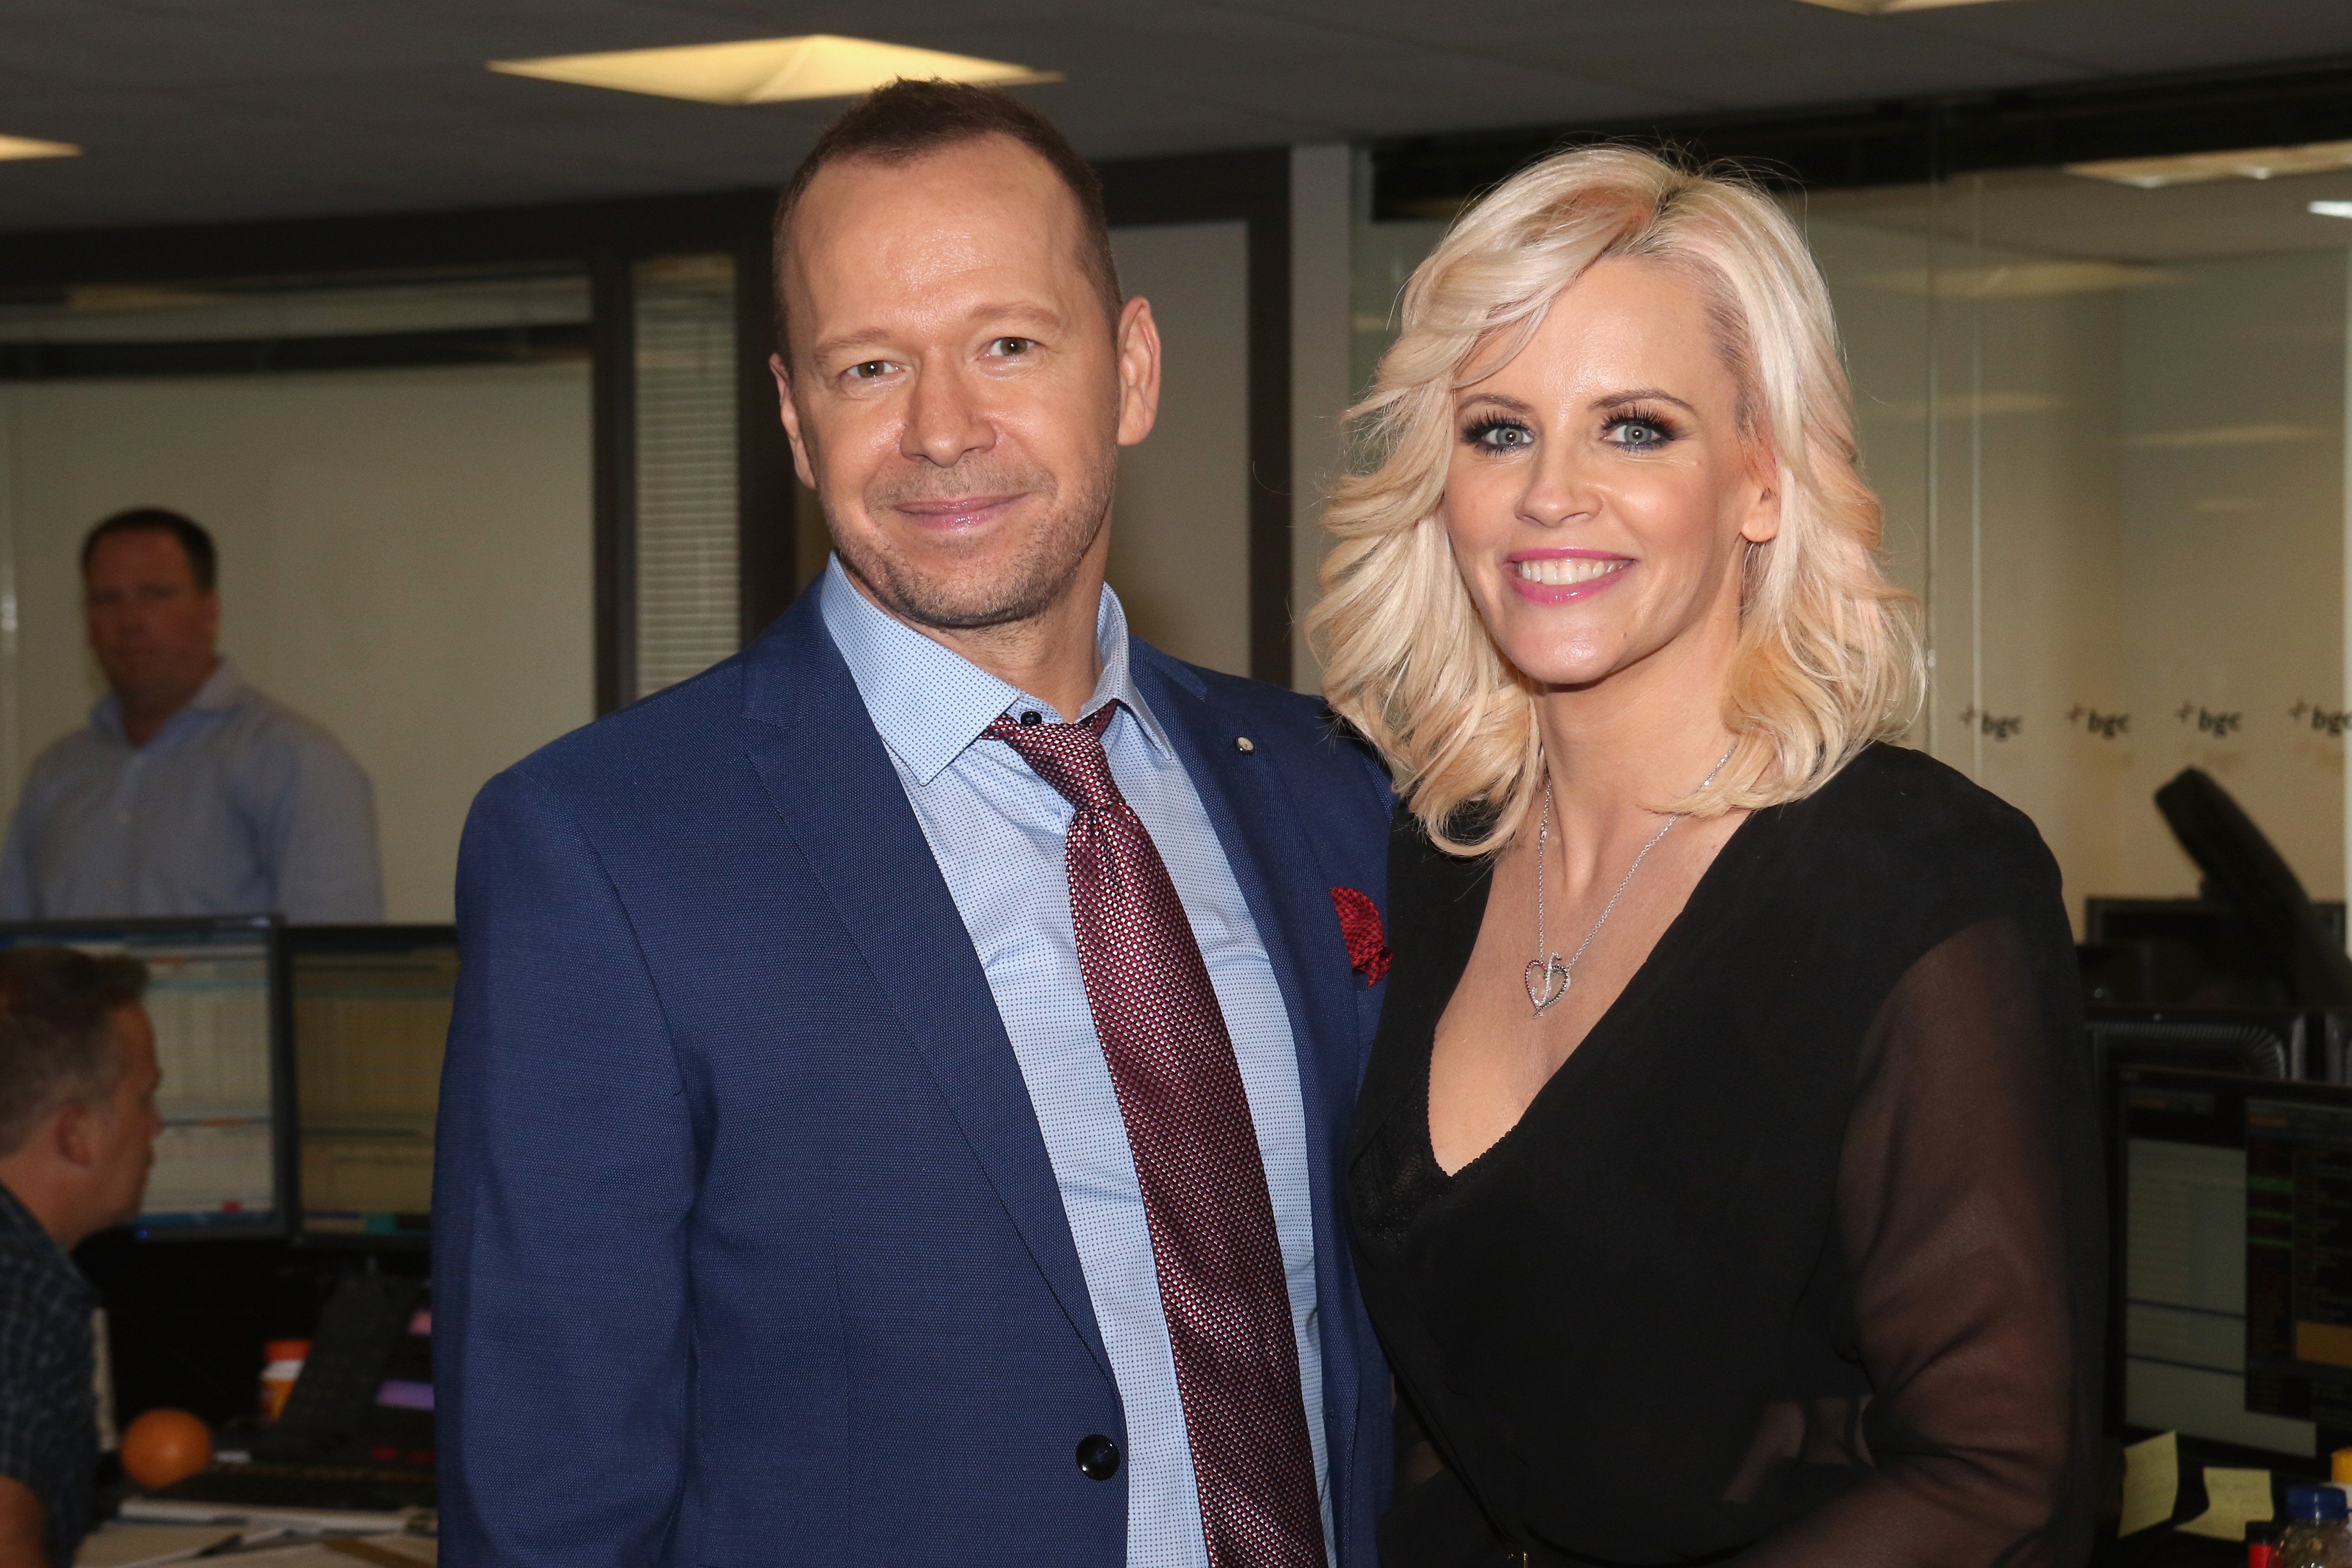 Donnie Wahlberg and Jenny McCarthy attend the Annual Charity Day in New York City on September 11, 2015 | Photo: Getty Images 